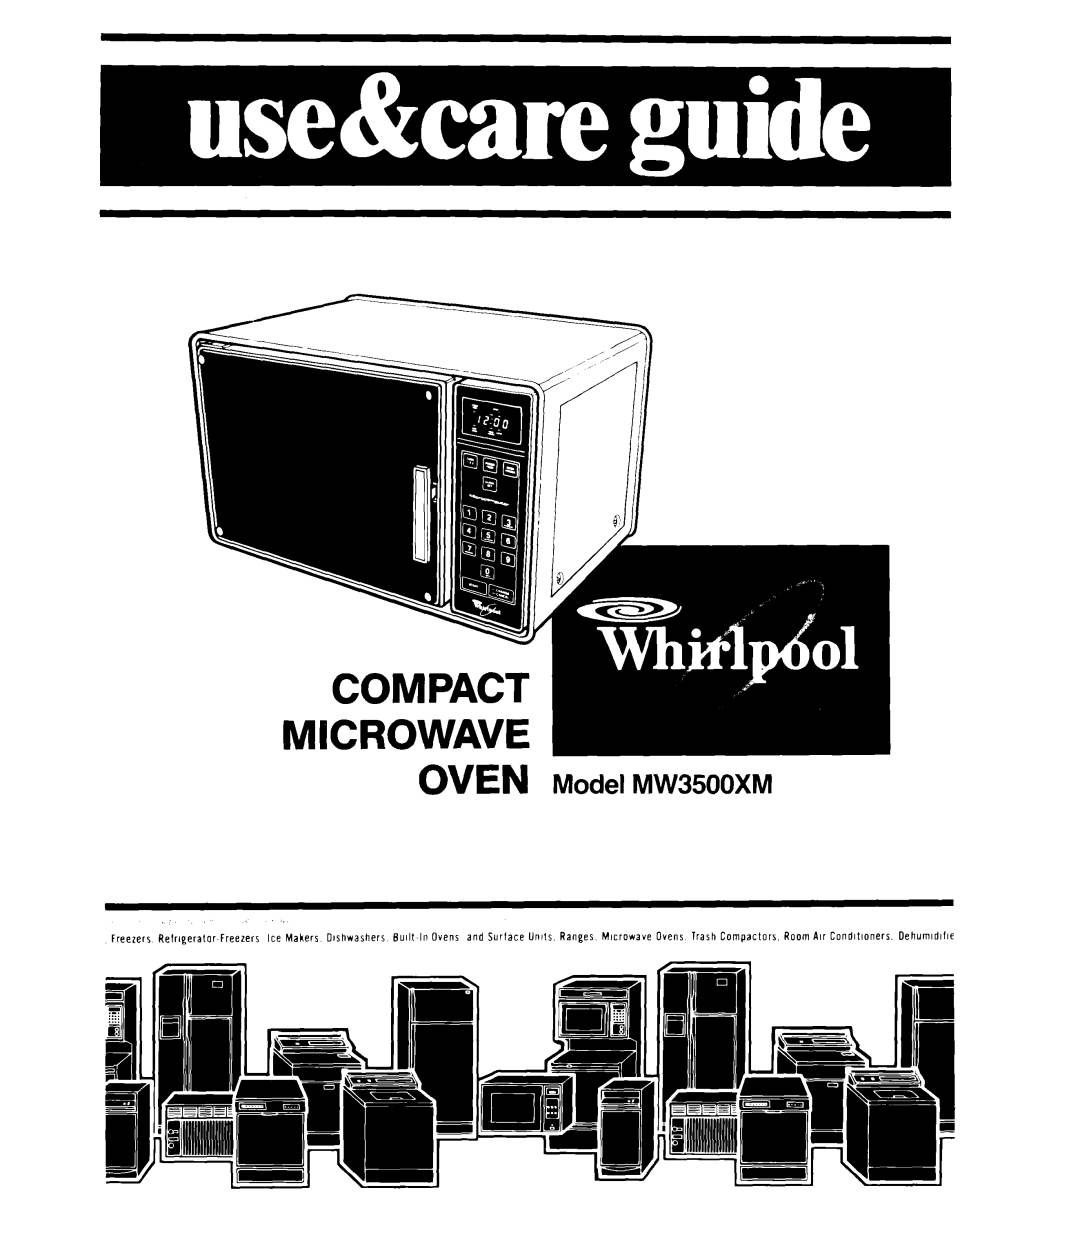 Whirlpool manual OVEN Model MW3500XM, Compact ~Crowave 